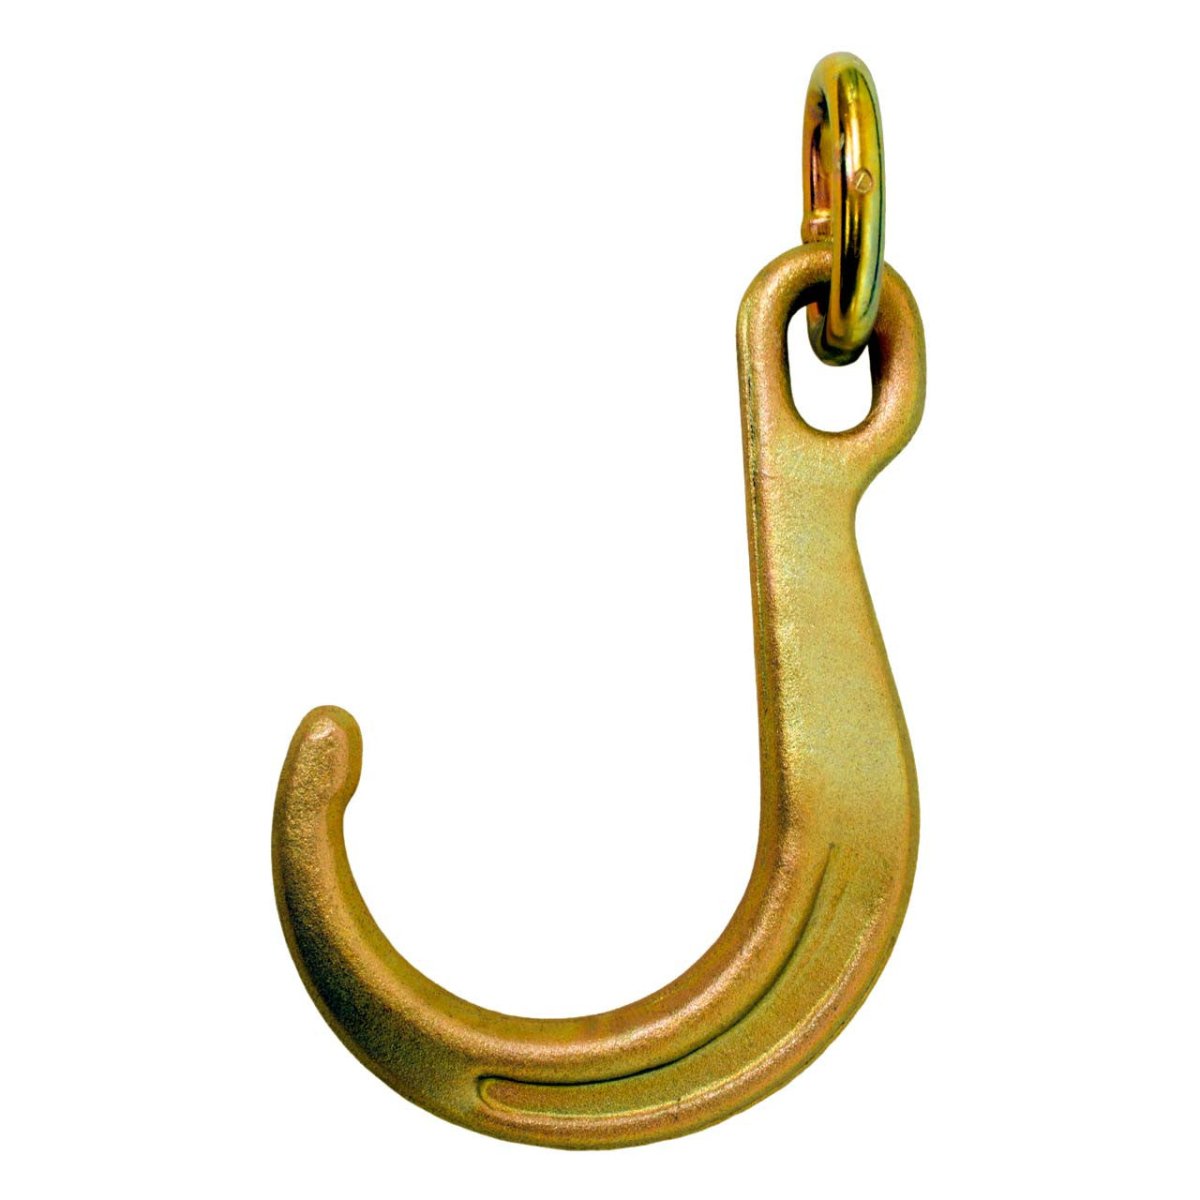 B/A Products Co. 8" Classic Style J Hook on Link - Z11-10-L - starequipmentsales